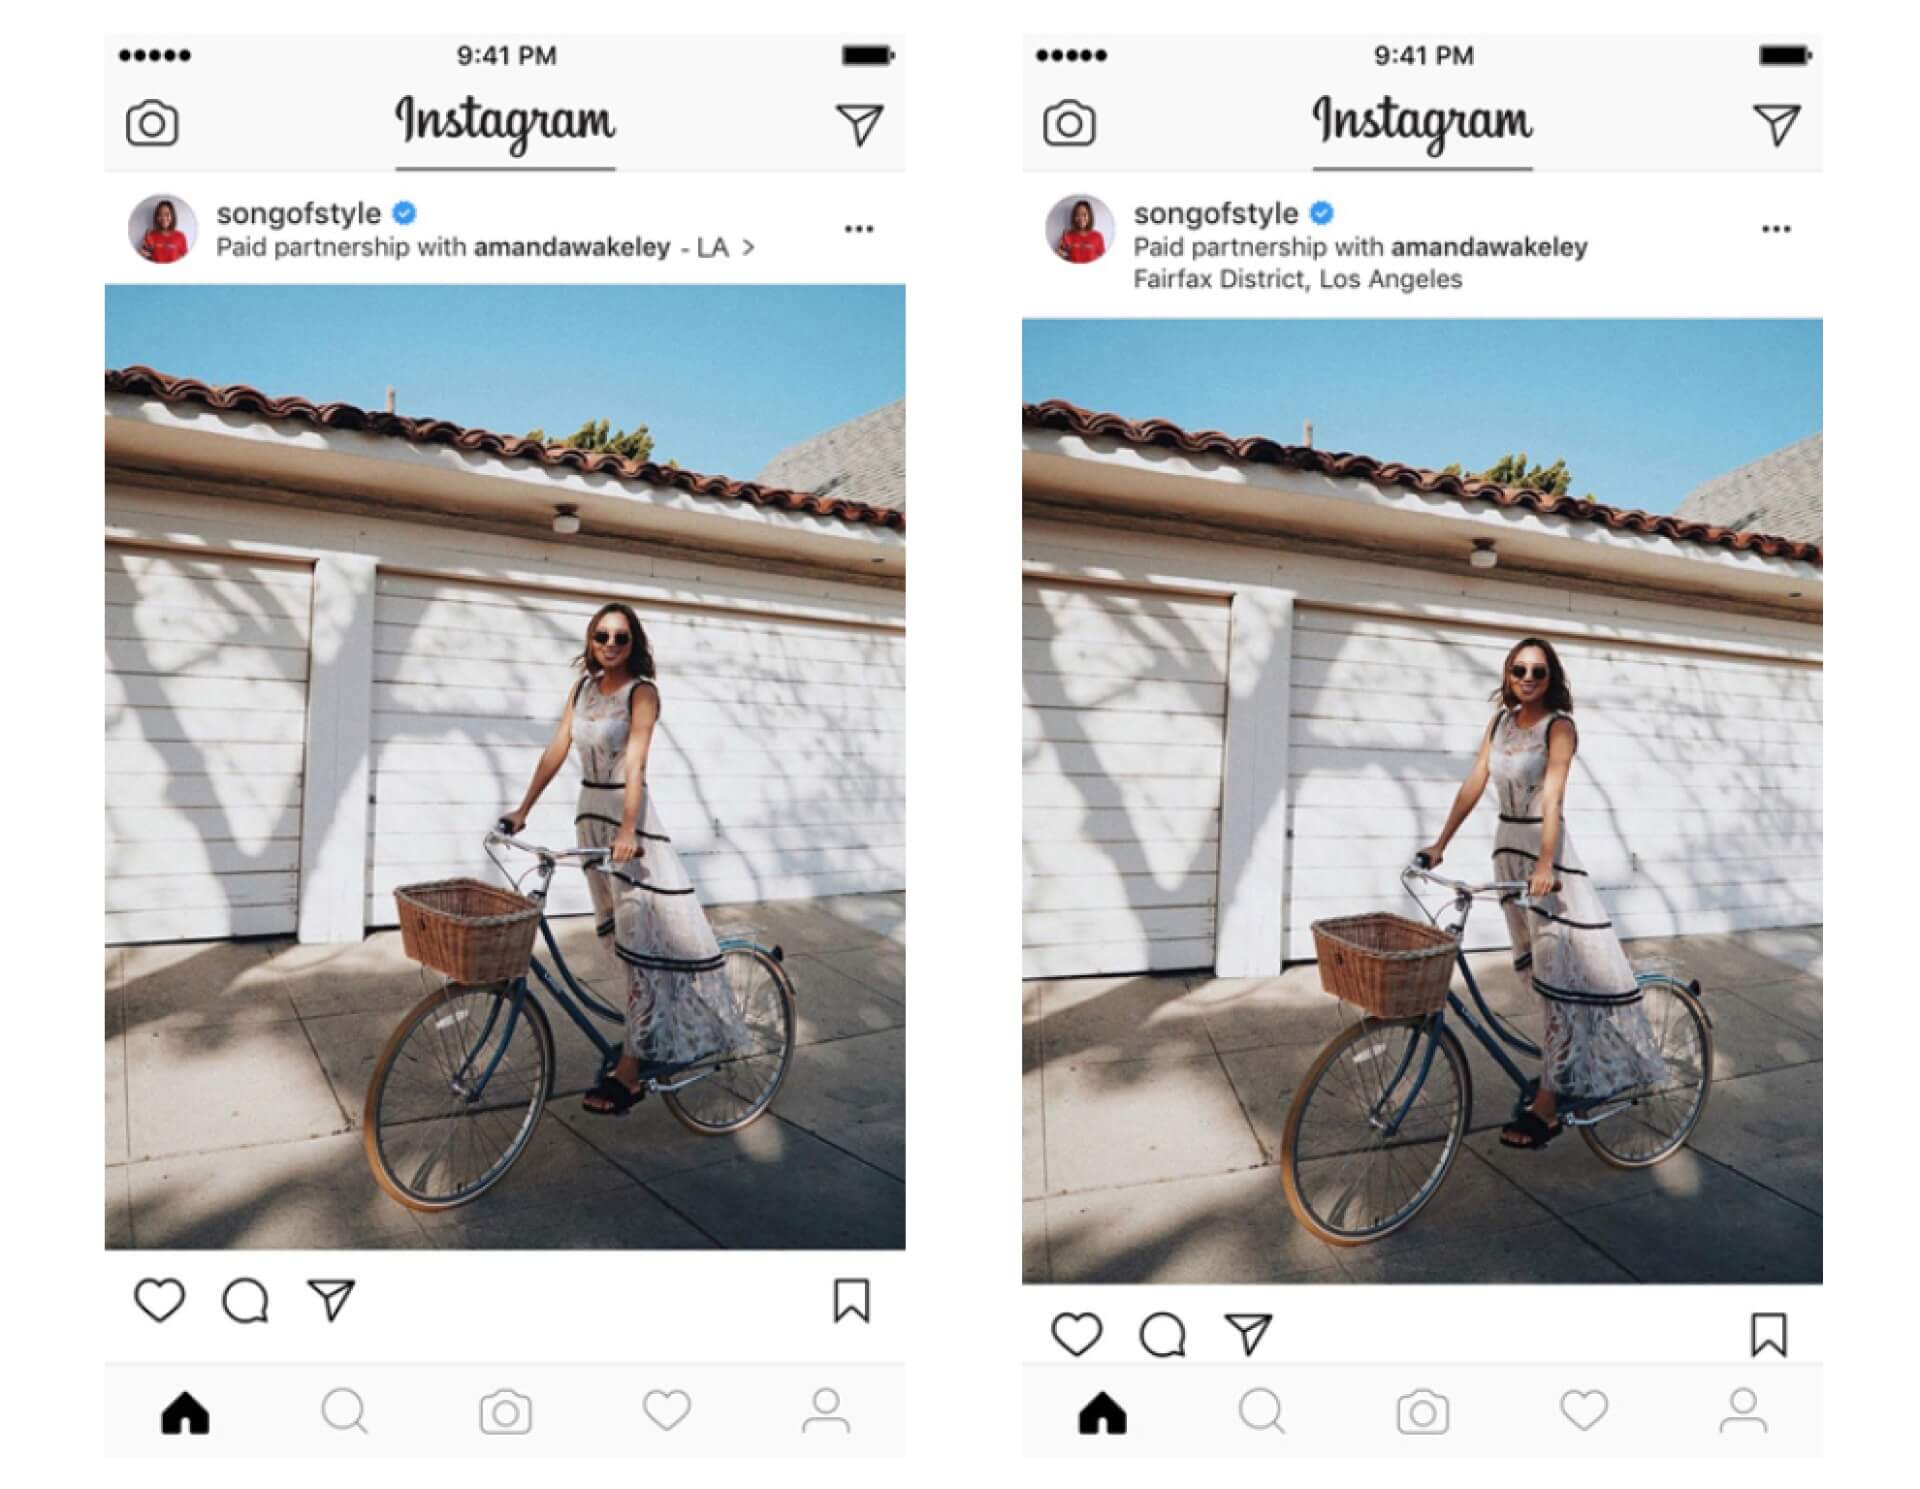 What will happen to influencer marketing if Instagram ‘Likes’ go away?